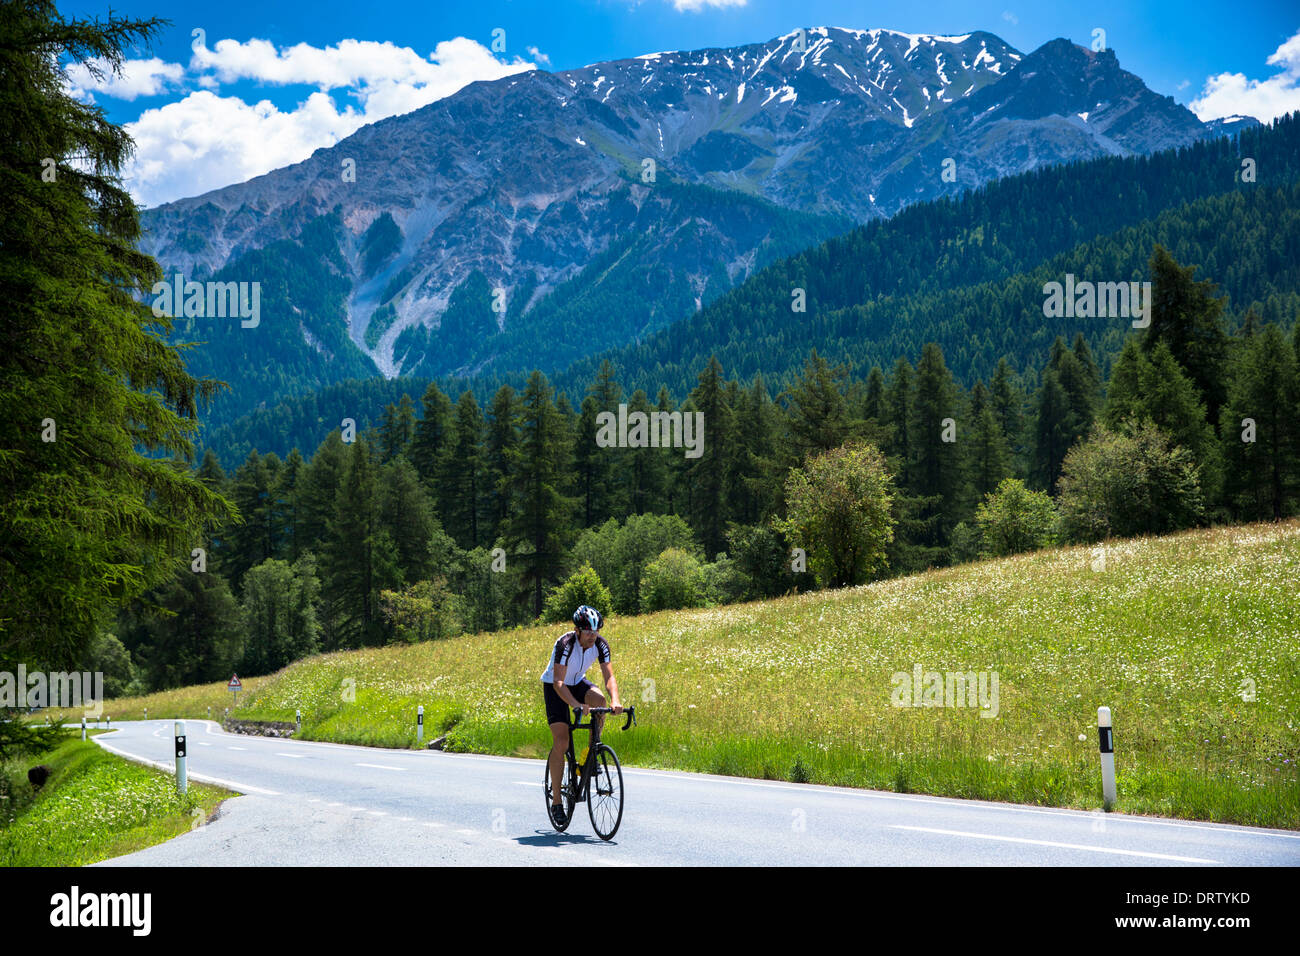 Cycling uphill in the Swiss National Park with background of the Swiss Alps, Switzerland Stock Photo